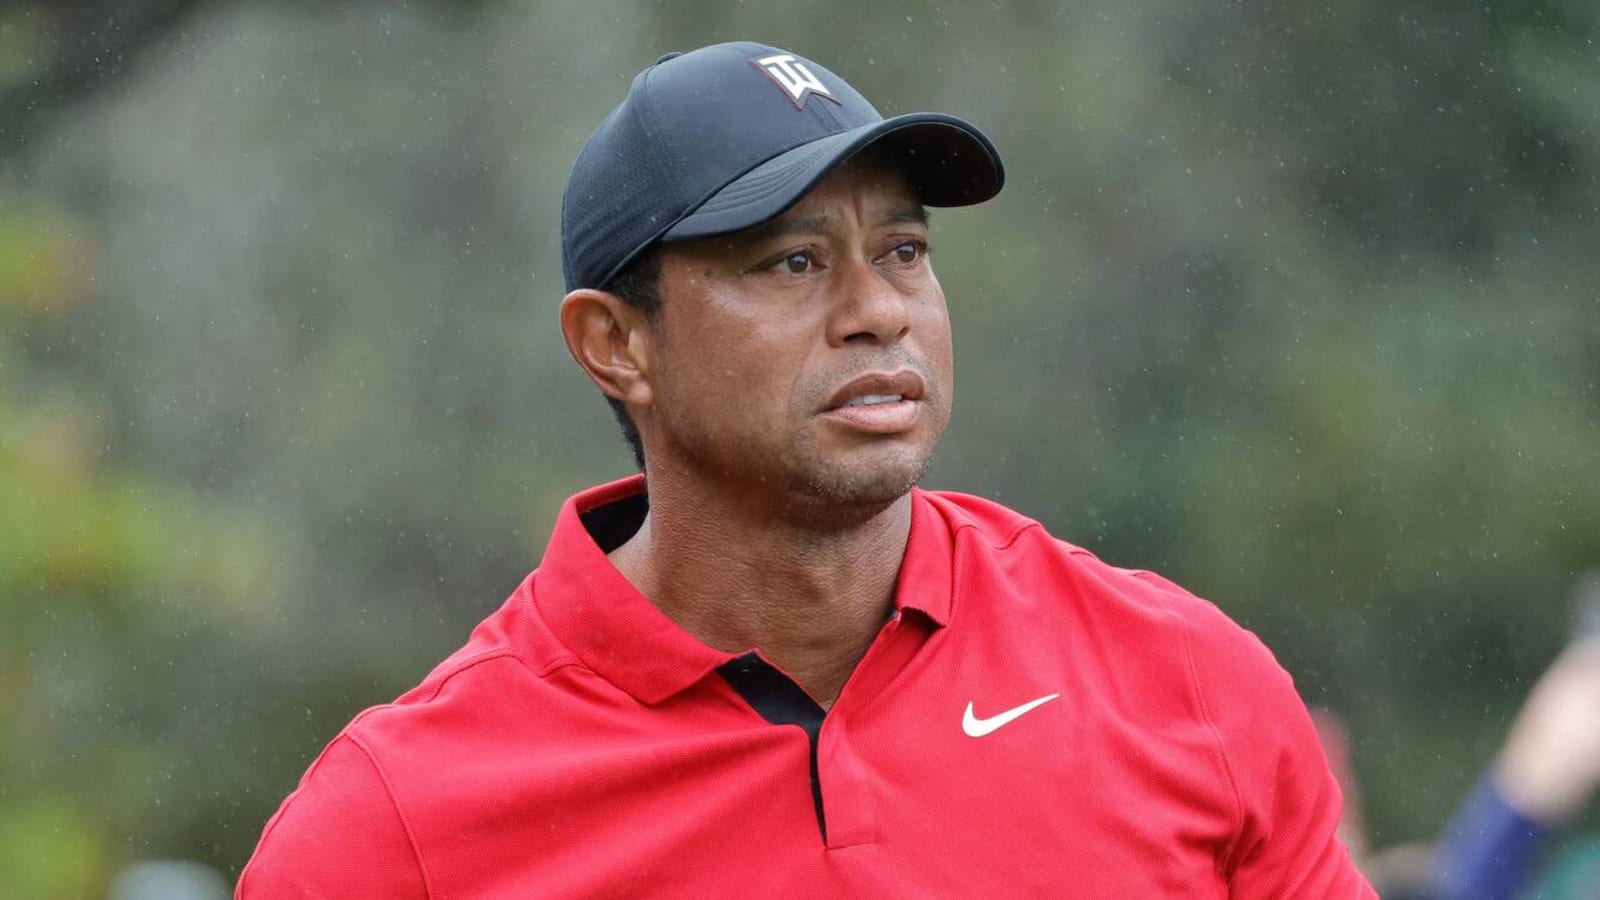 Which clothing brand will Tiger Woods partner with next? | Yardbarker